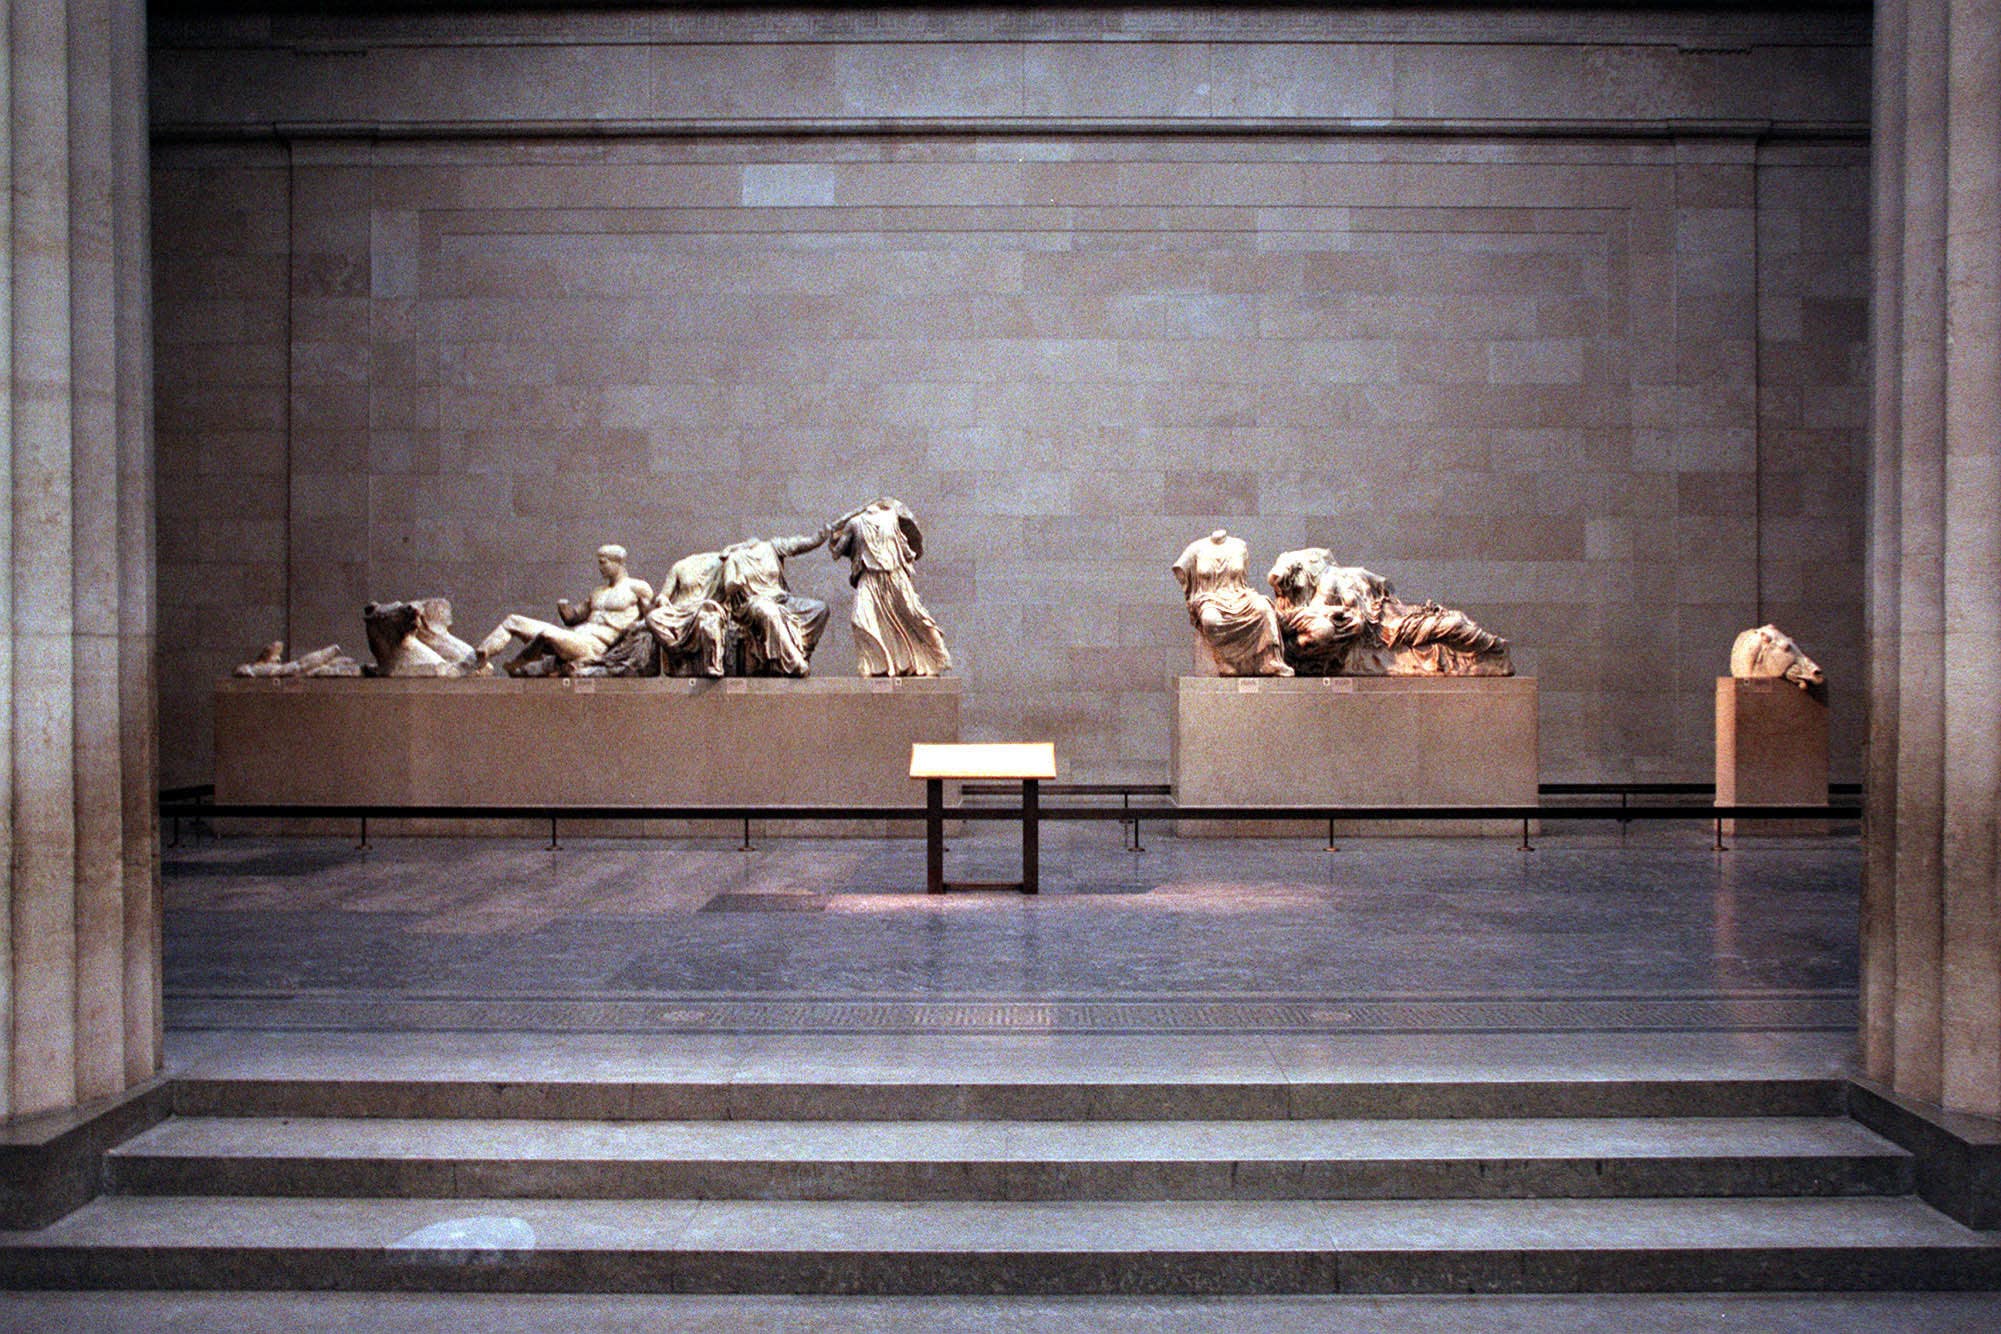 The Parthenon Sculptures, also known as the Elgin Marbles, at the British Museum in London (Matthew Fearn/PA)